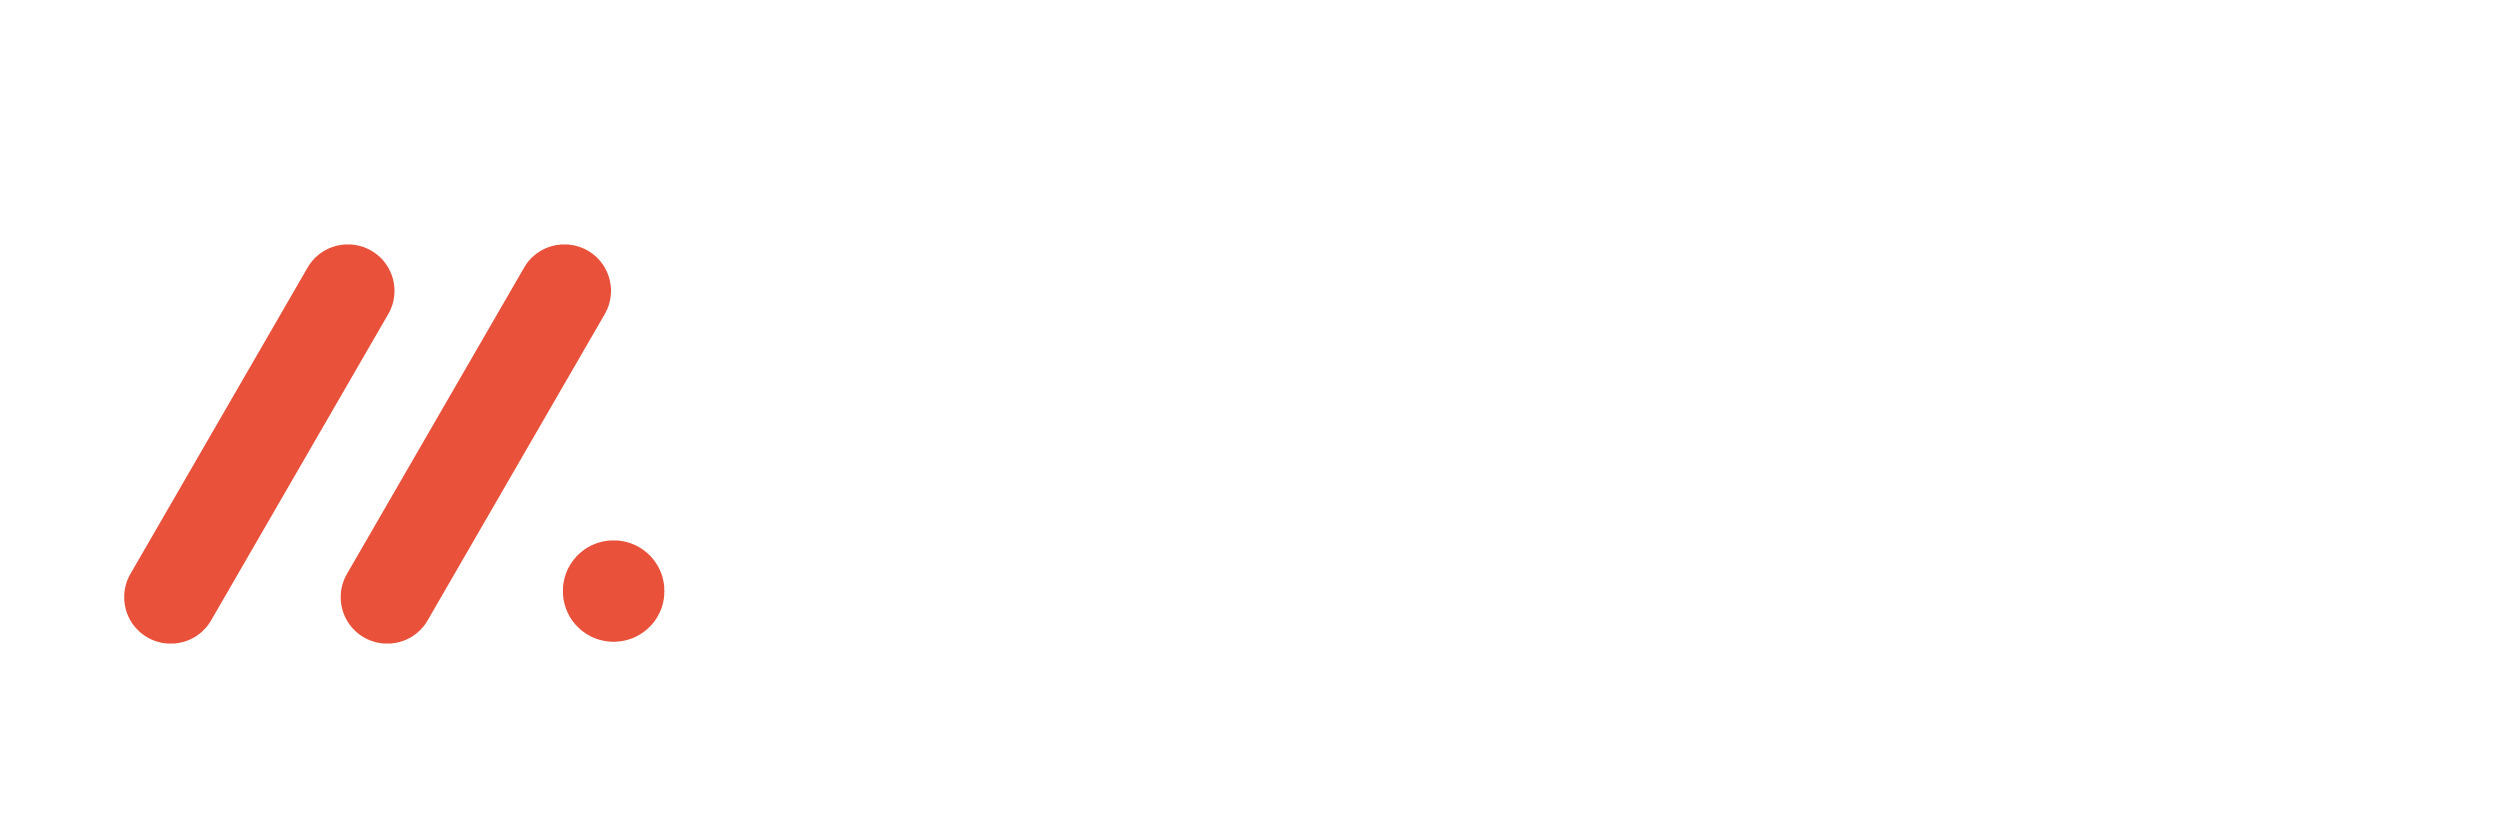 Mants, Safety Services